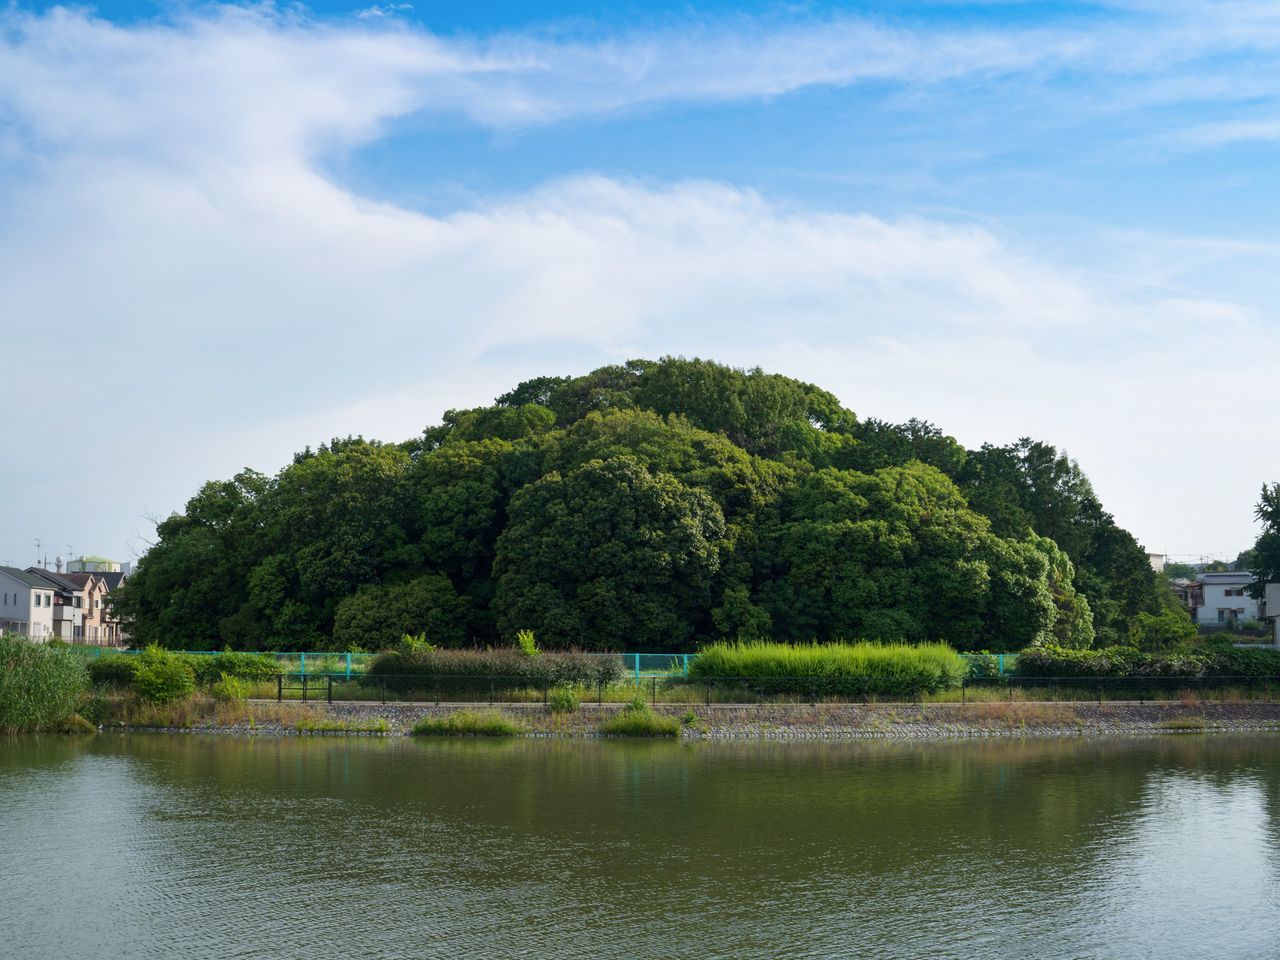 The tomb of the Ninken Emperor as seen from the other side of Shimoda Pond.